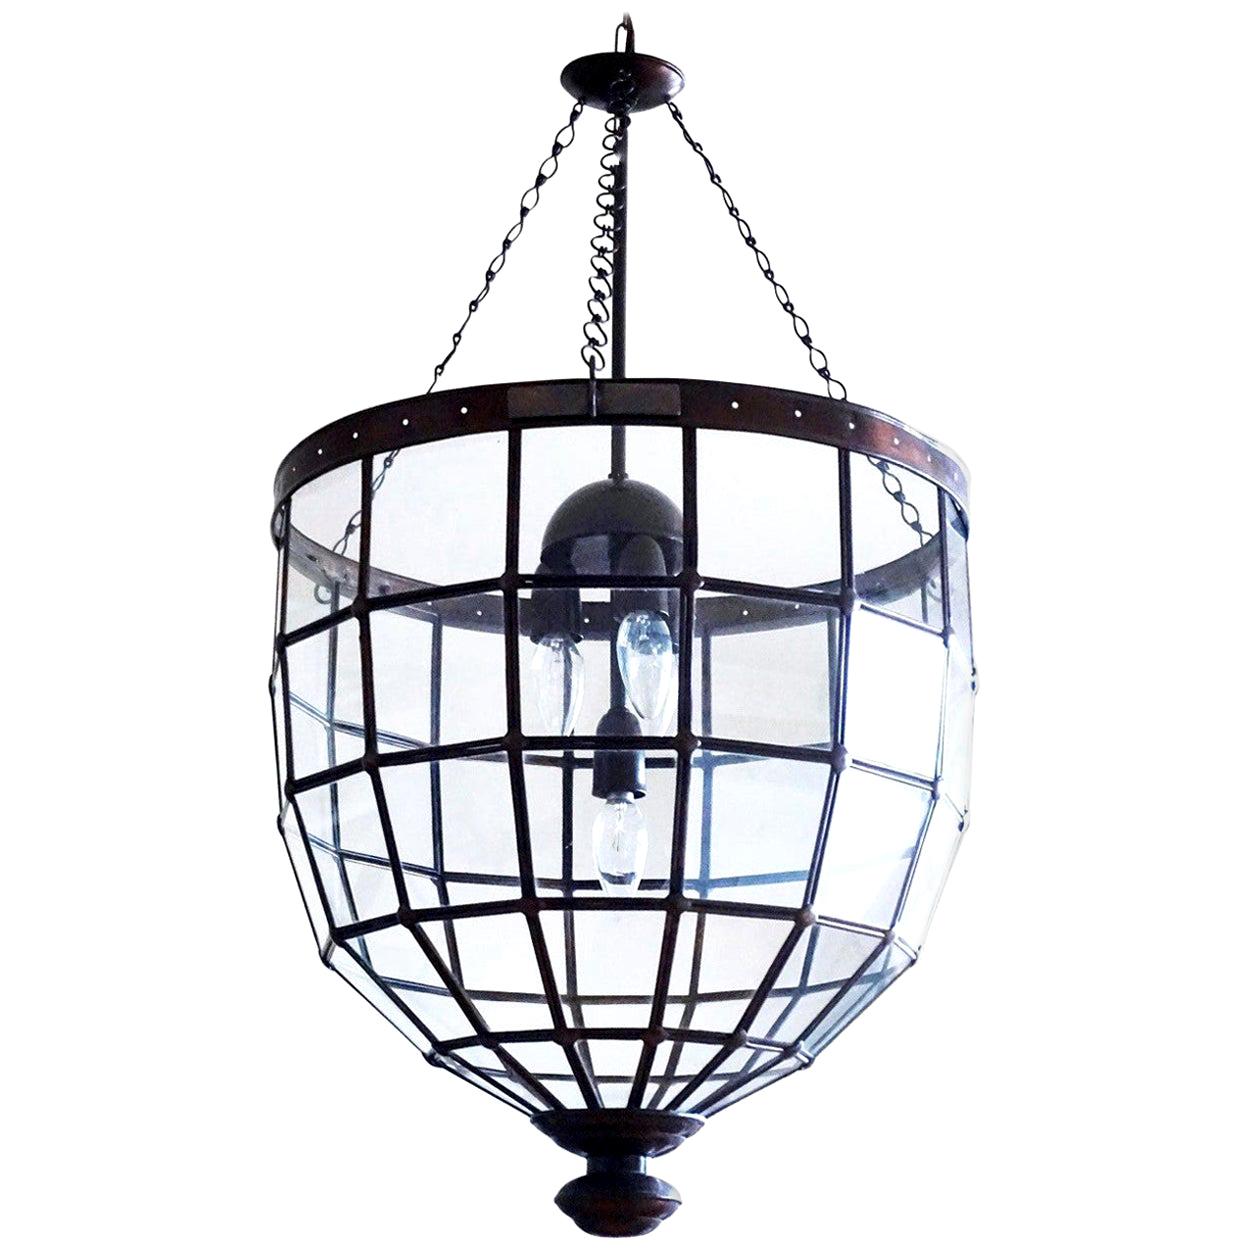 Large Italian Handcrafted Copper and Leaded Glass Four-Light Lantern, 1930s